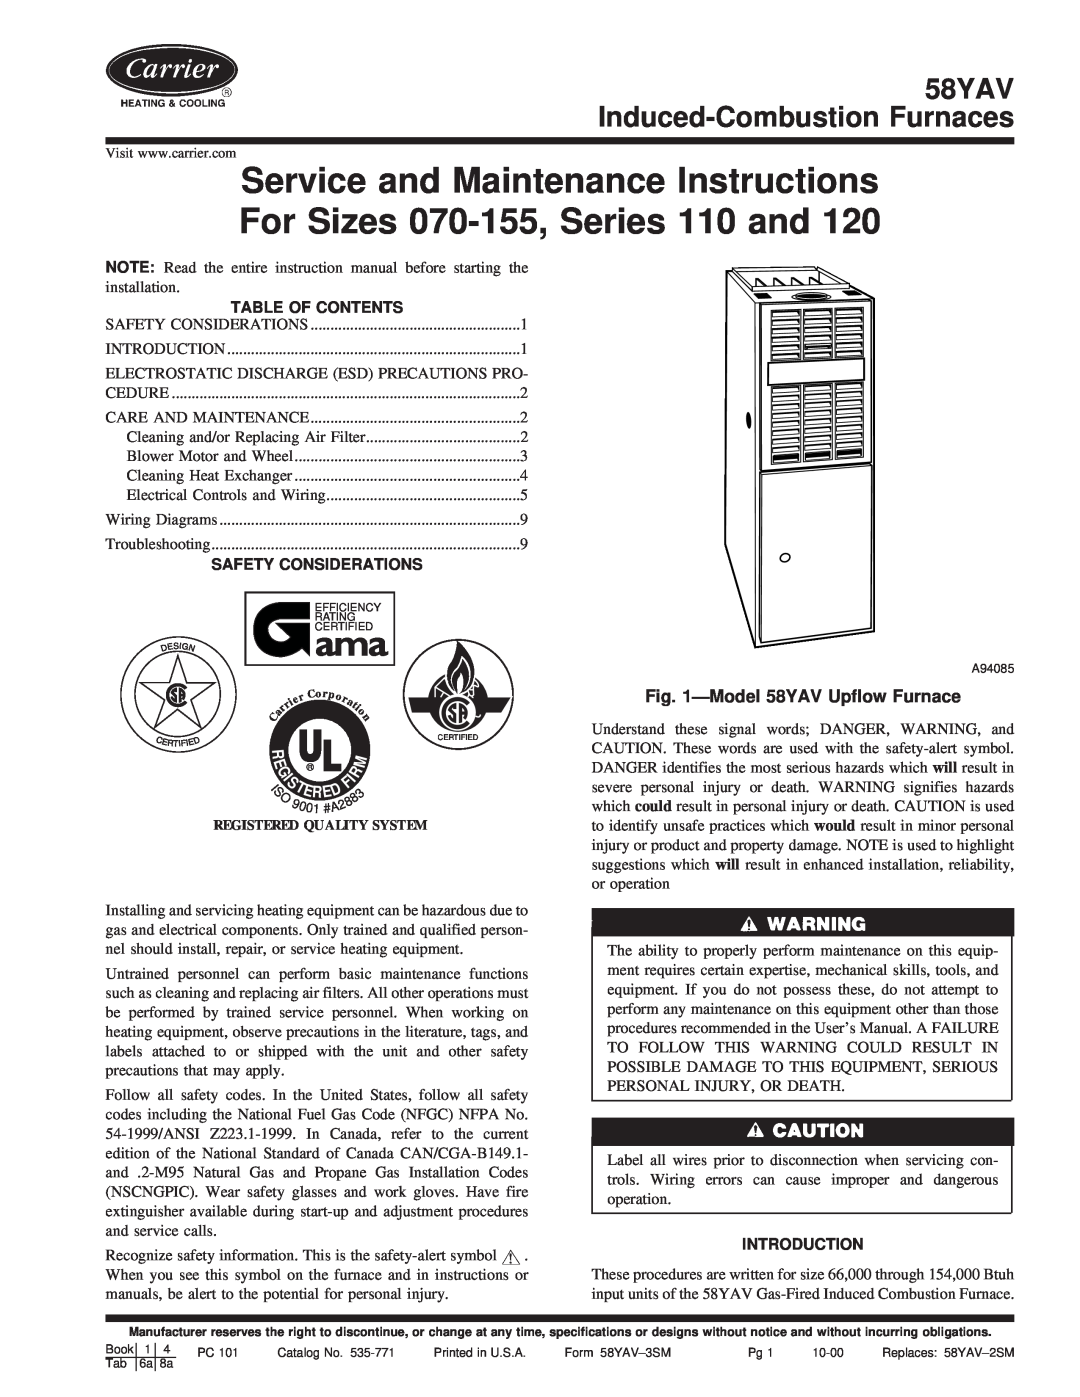 Carrier instruction manual ÐModel 58YAV Upflow Furnace, Table Of Contents, Safety Considerations, Introduction 